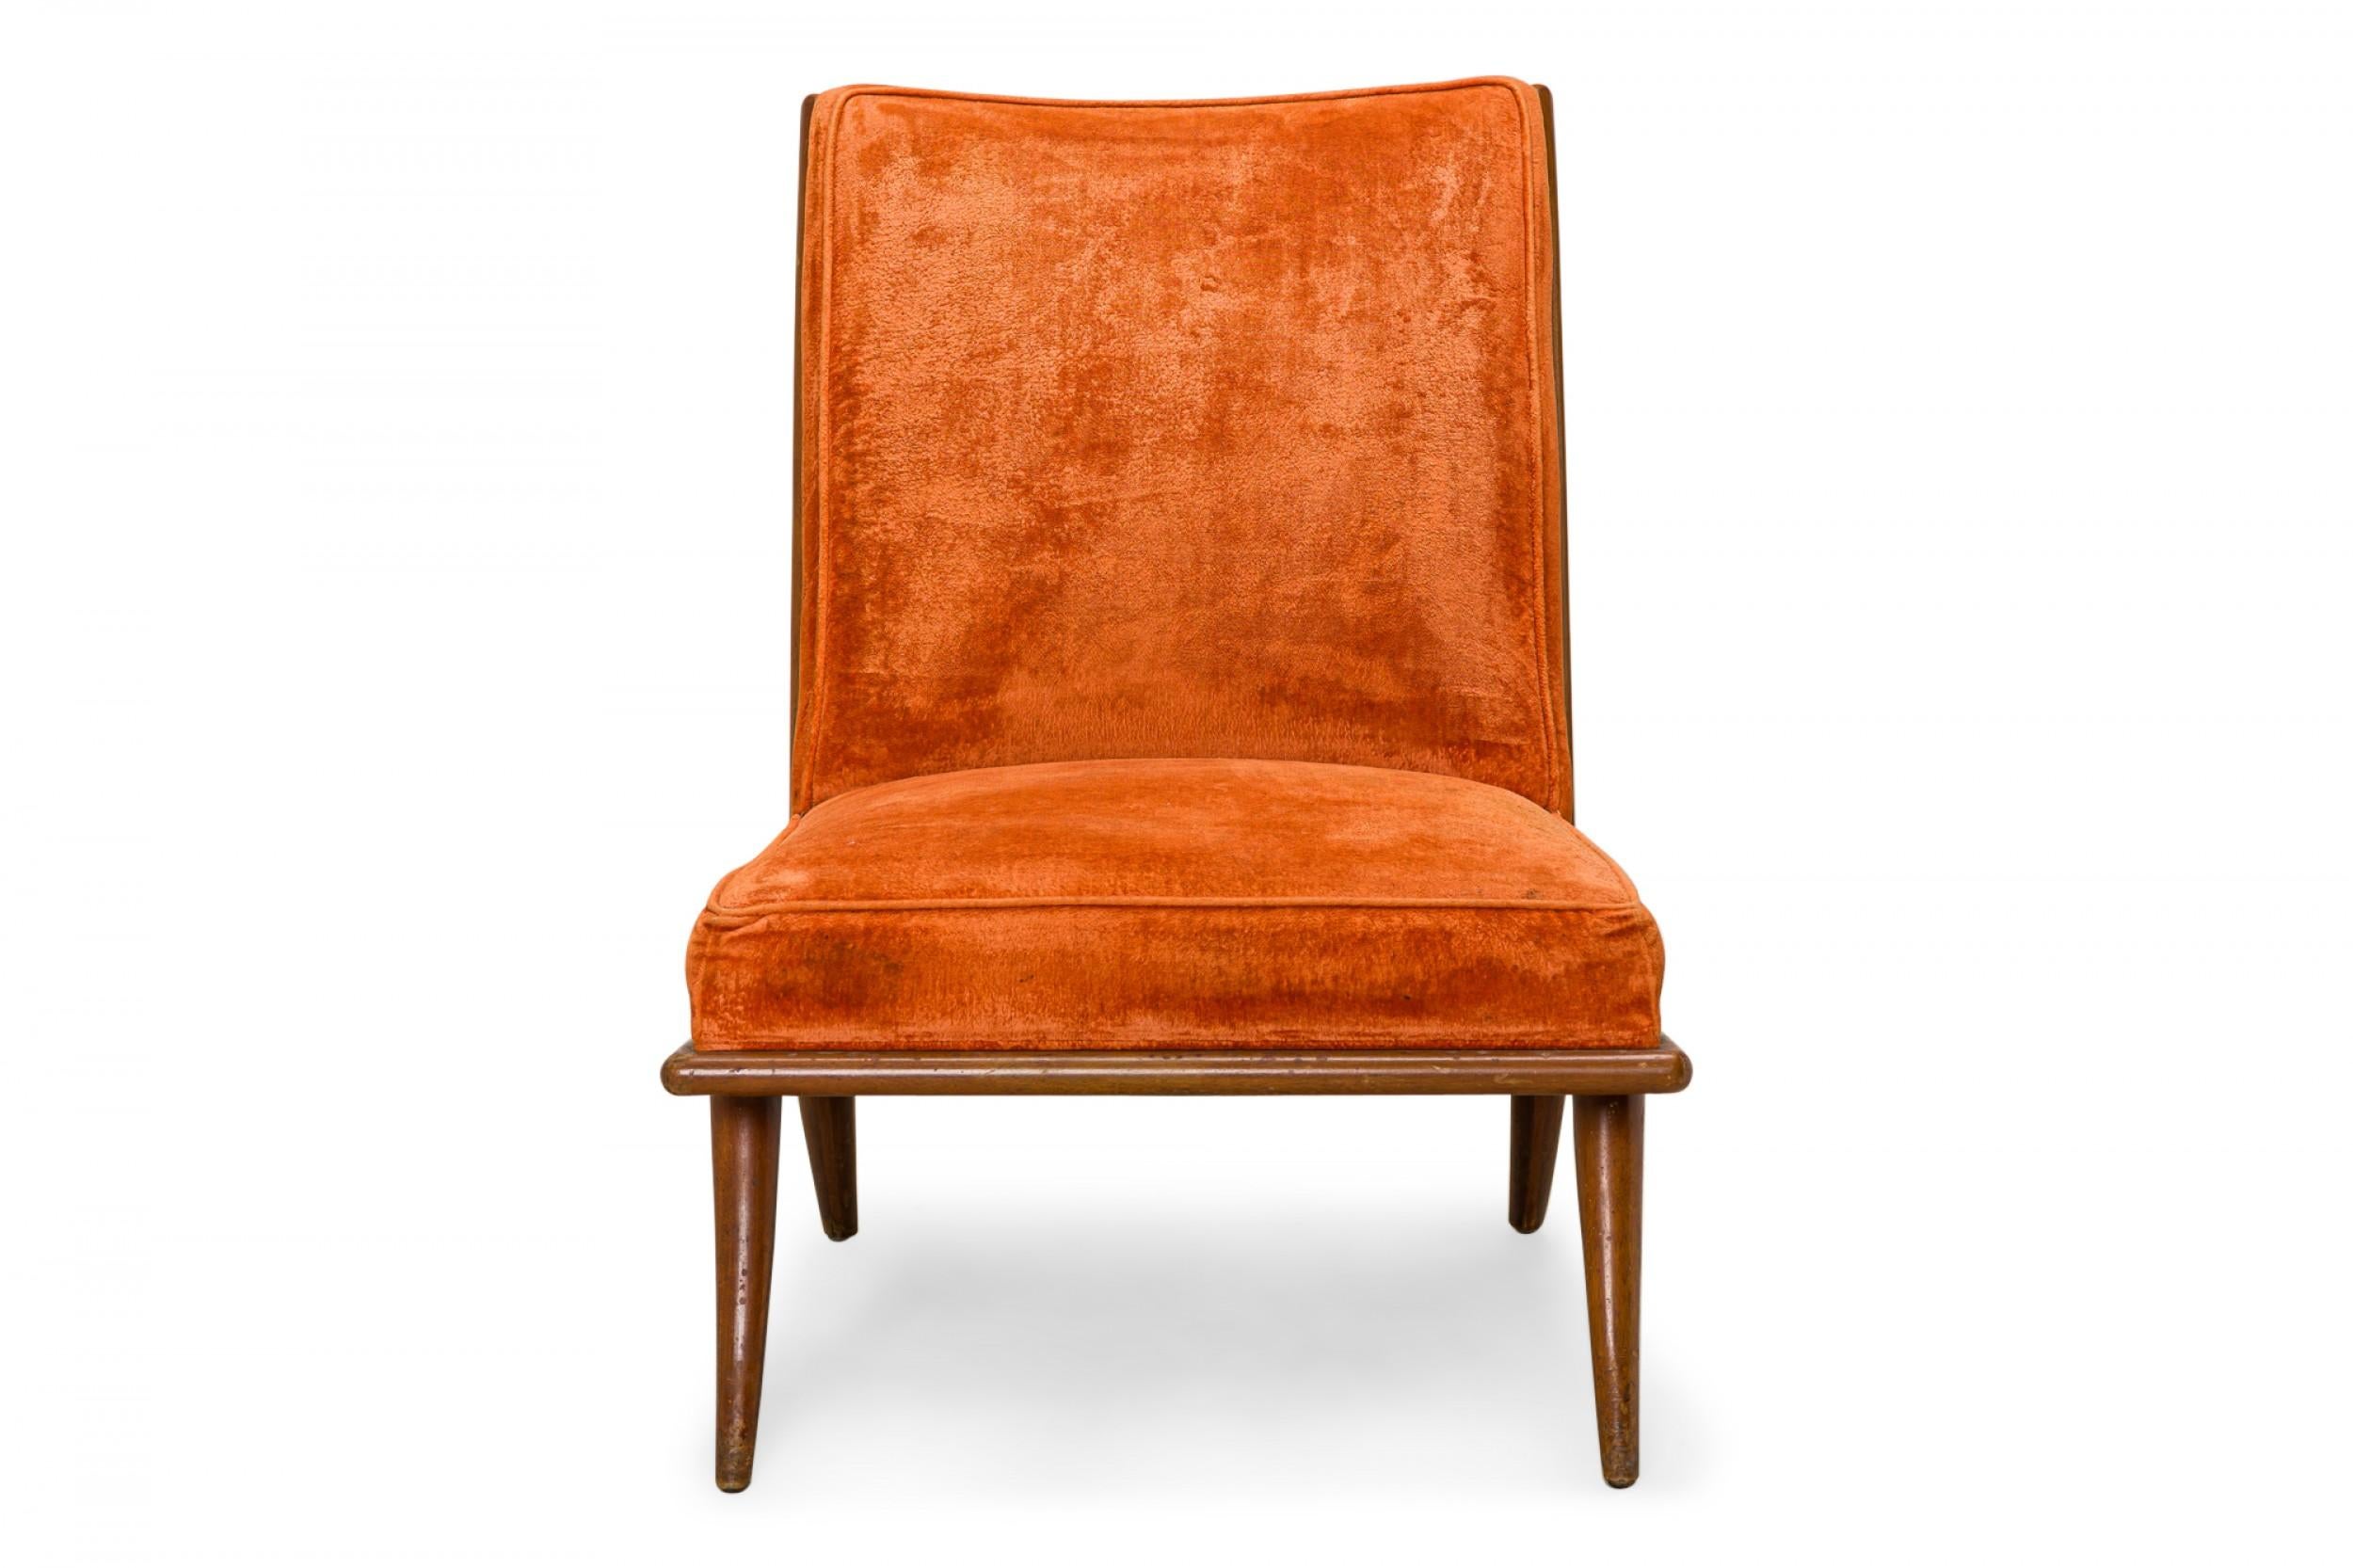 American Mid-Century slipper / side chair with a walnut frame, square profile, and orange velour upholstery, resting on four slightly tapered dowel legs. (T.H. ROBSJOHN-GIBBINGS FOR WIDDICOMB FURNITURE COMPANY)
